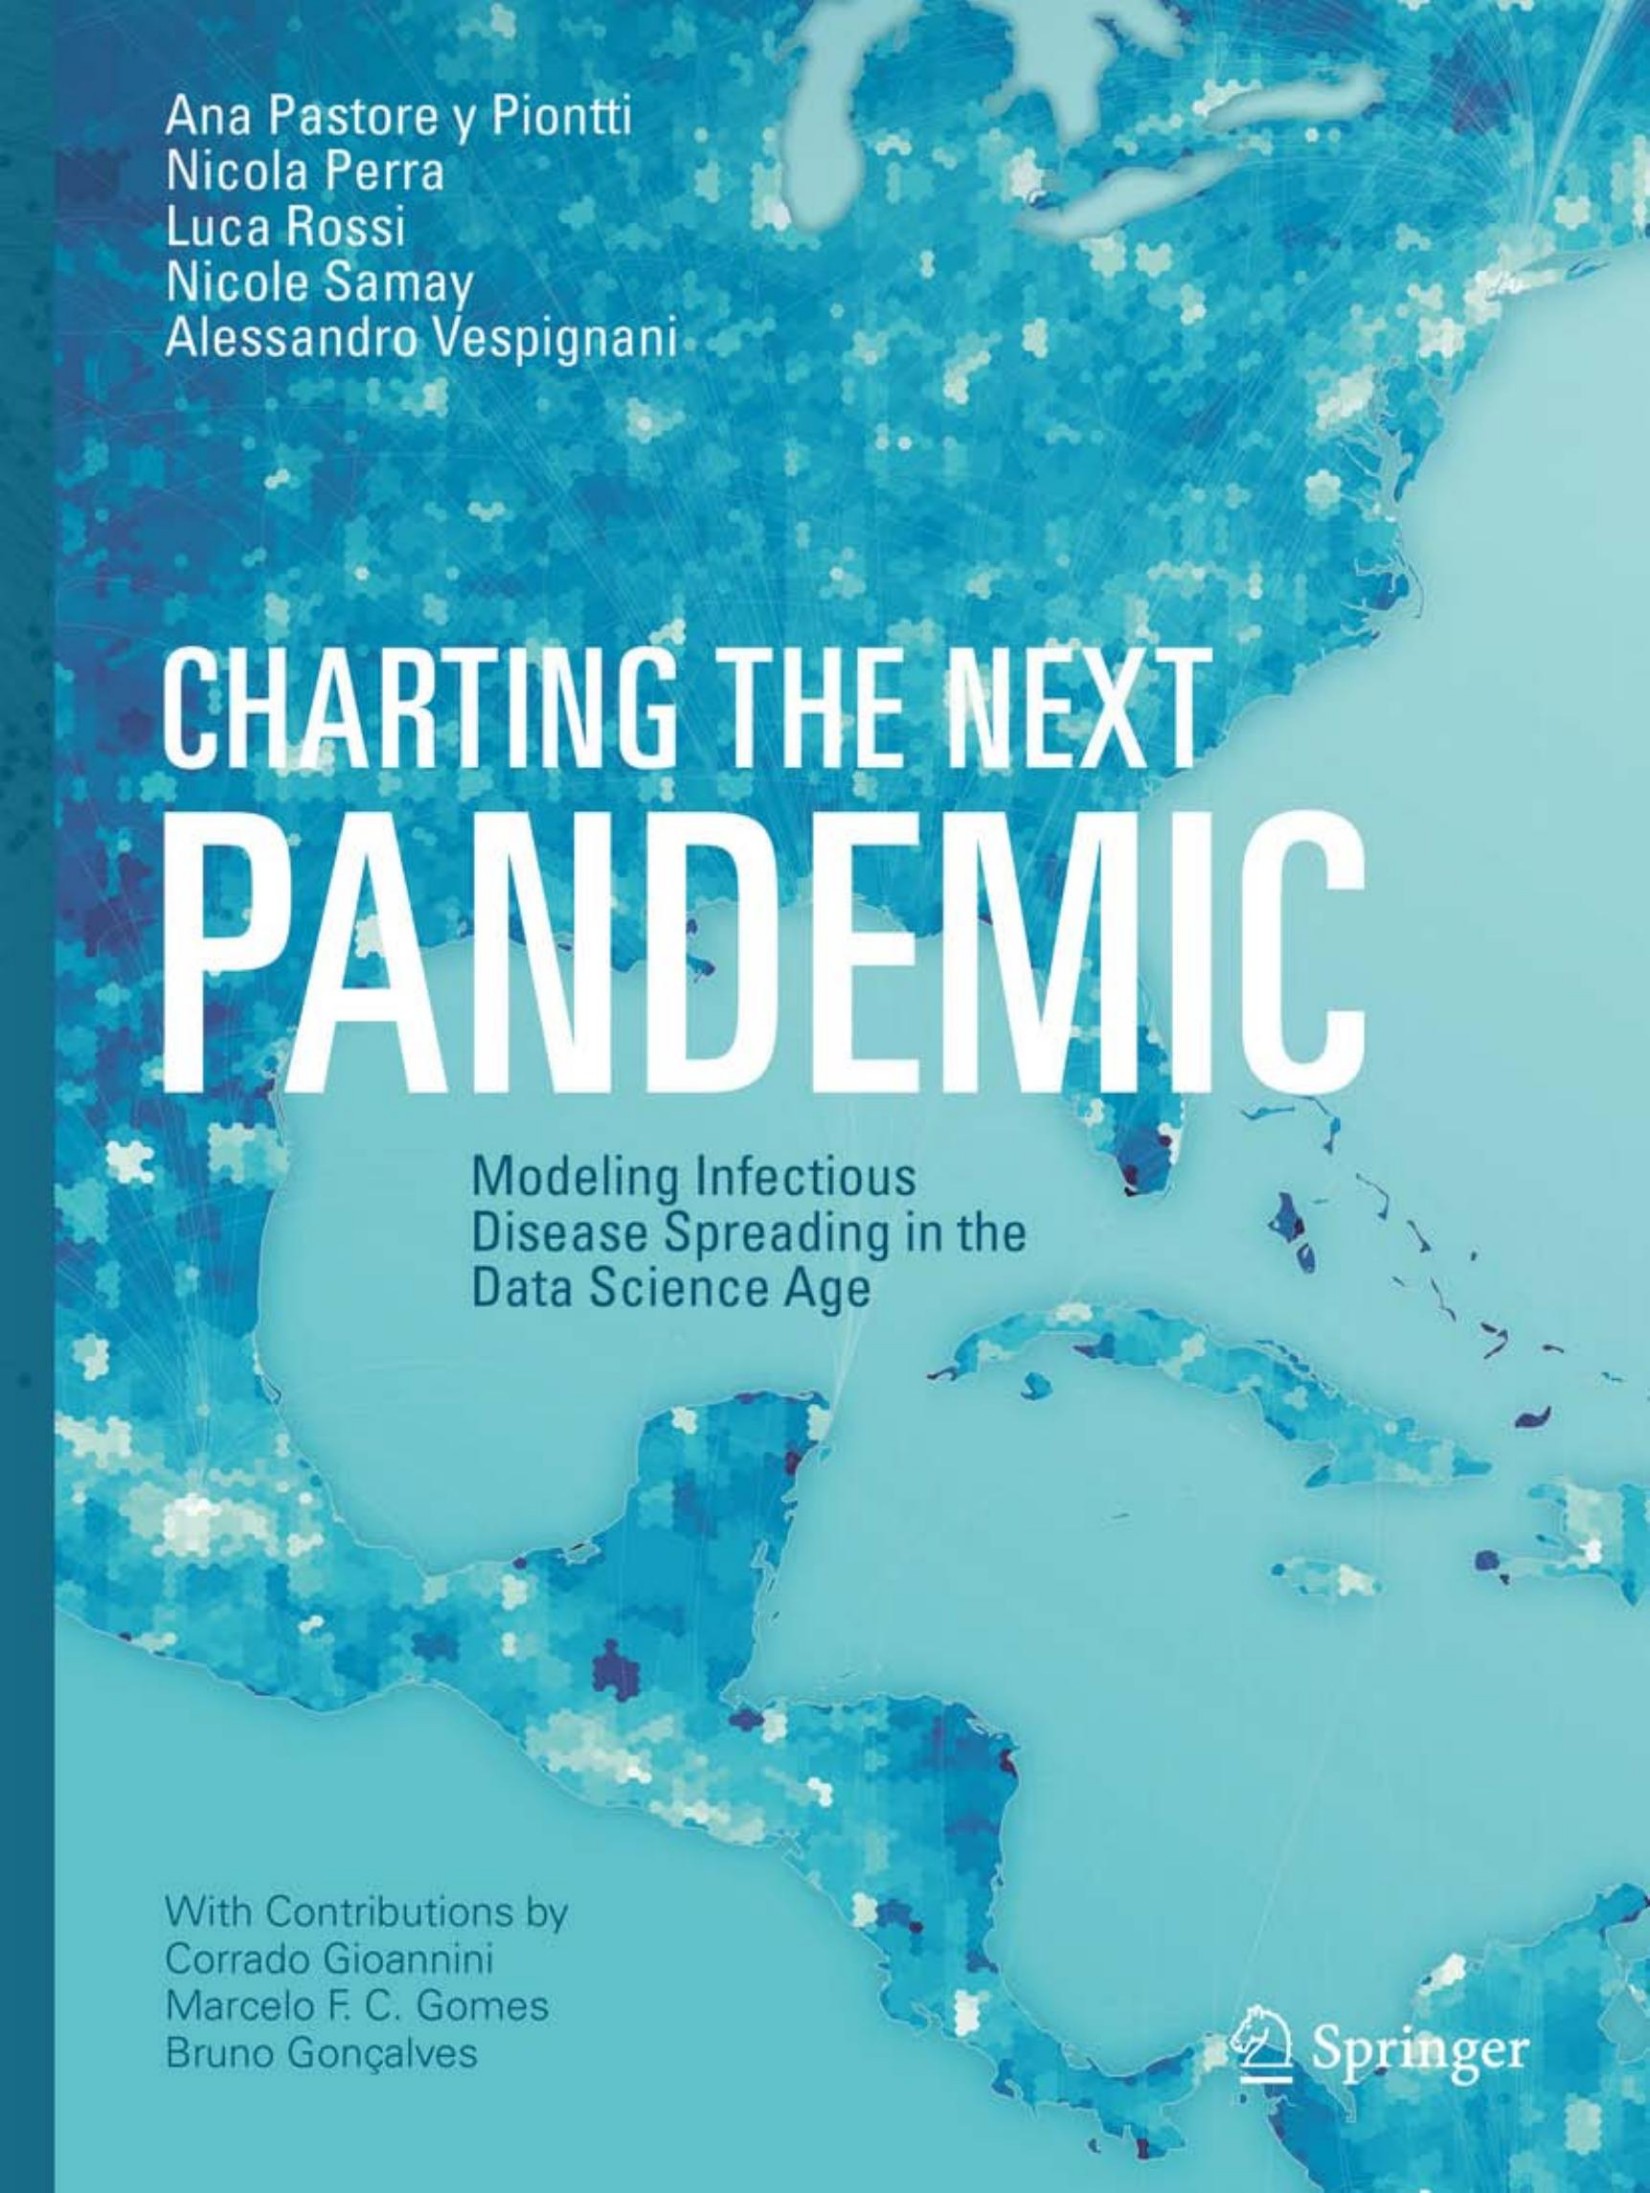 Charting the Next Pandemic Modeling Infectious Disease Spreading in the Data Science Age 2019